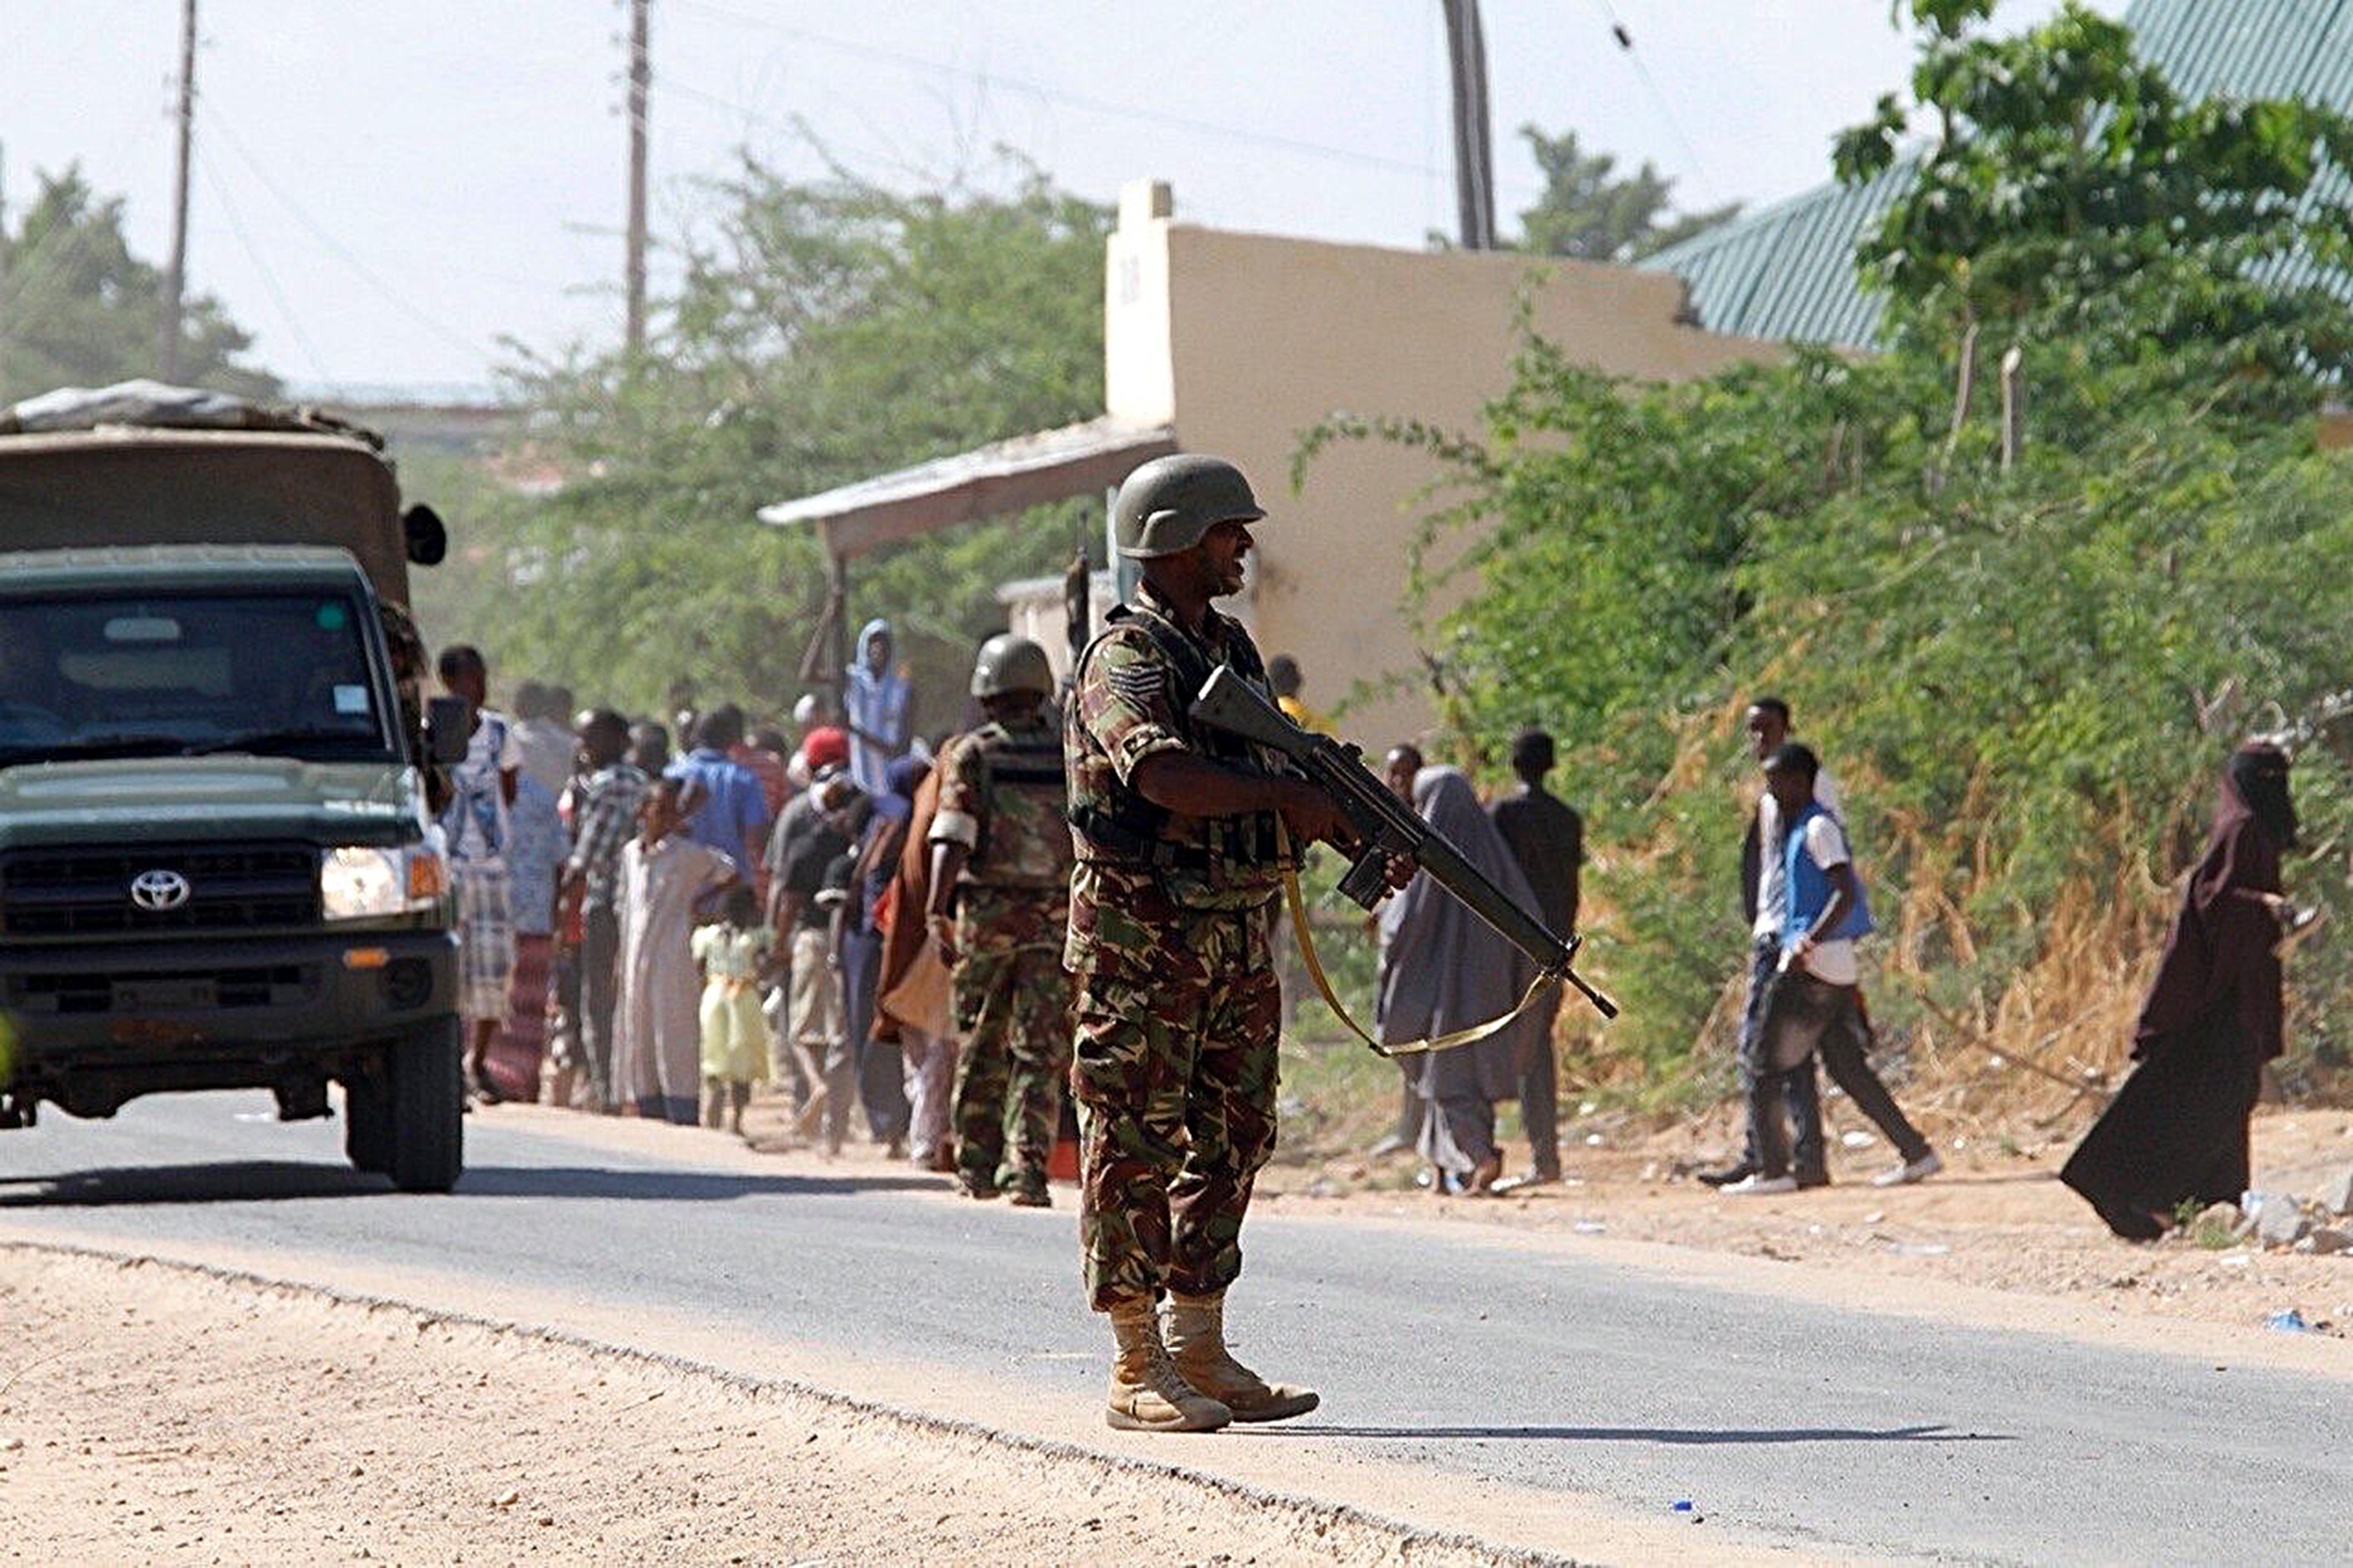 Security forces guard after Al-Shabaab terrorists shot the students' way into Garissa University College, at least 147 students were killed and 79 injured, in Nairobi, Kenya, on April 2. (Anadolu Agency—Getty Images)